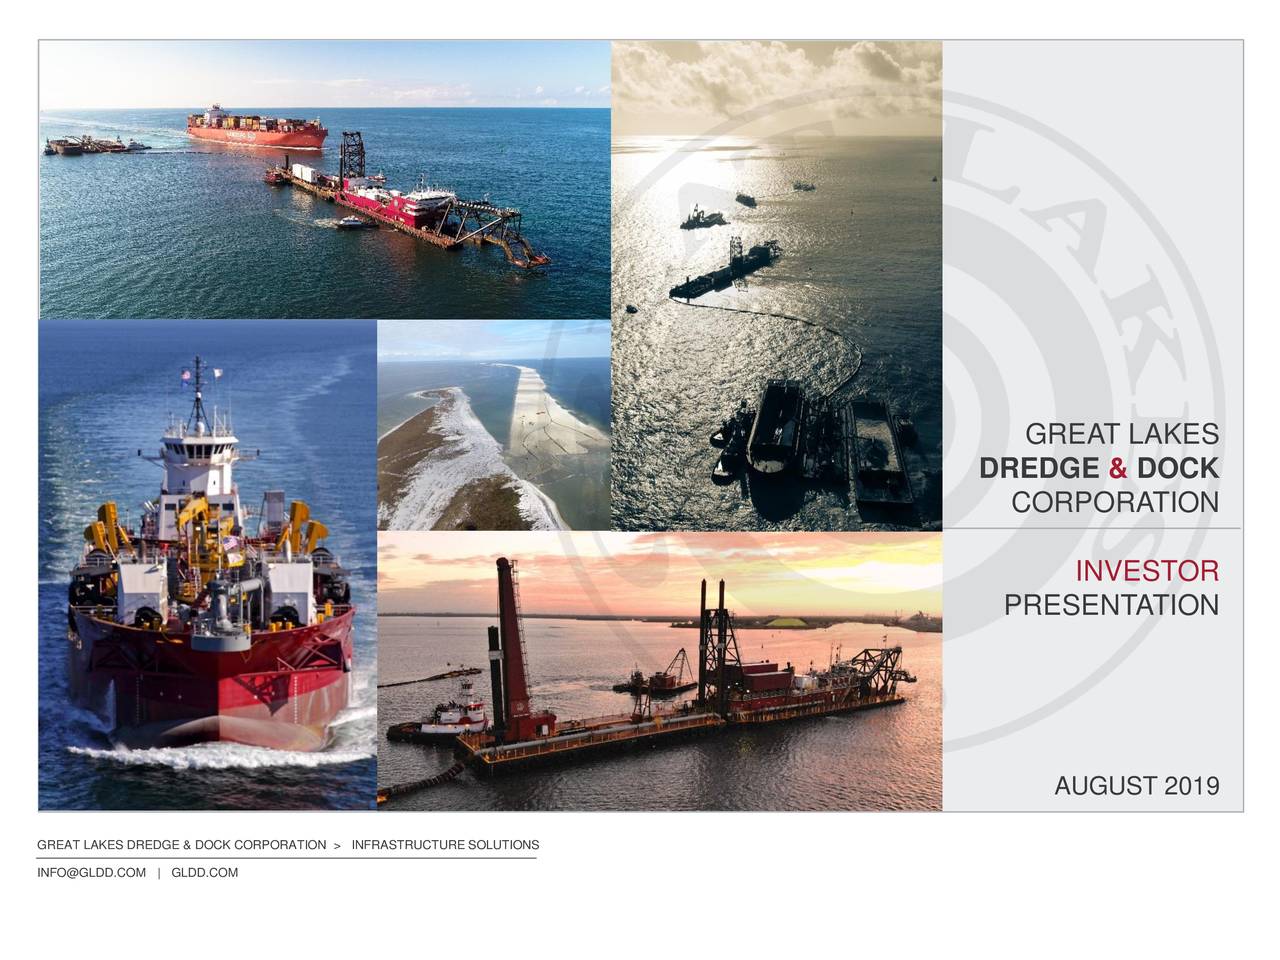 great lakes dredge and dock investor presentation